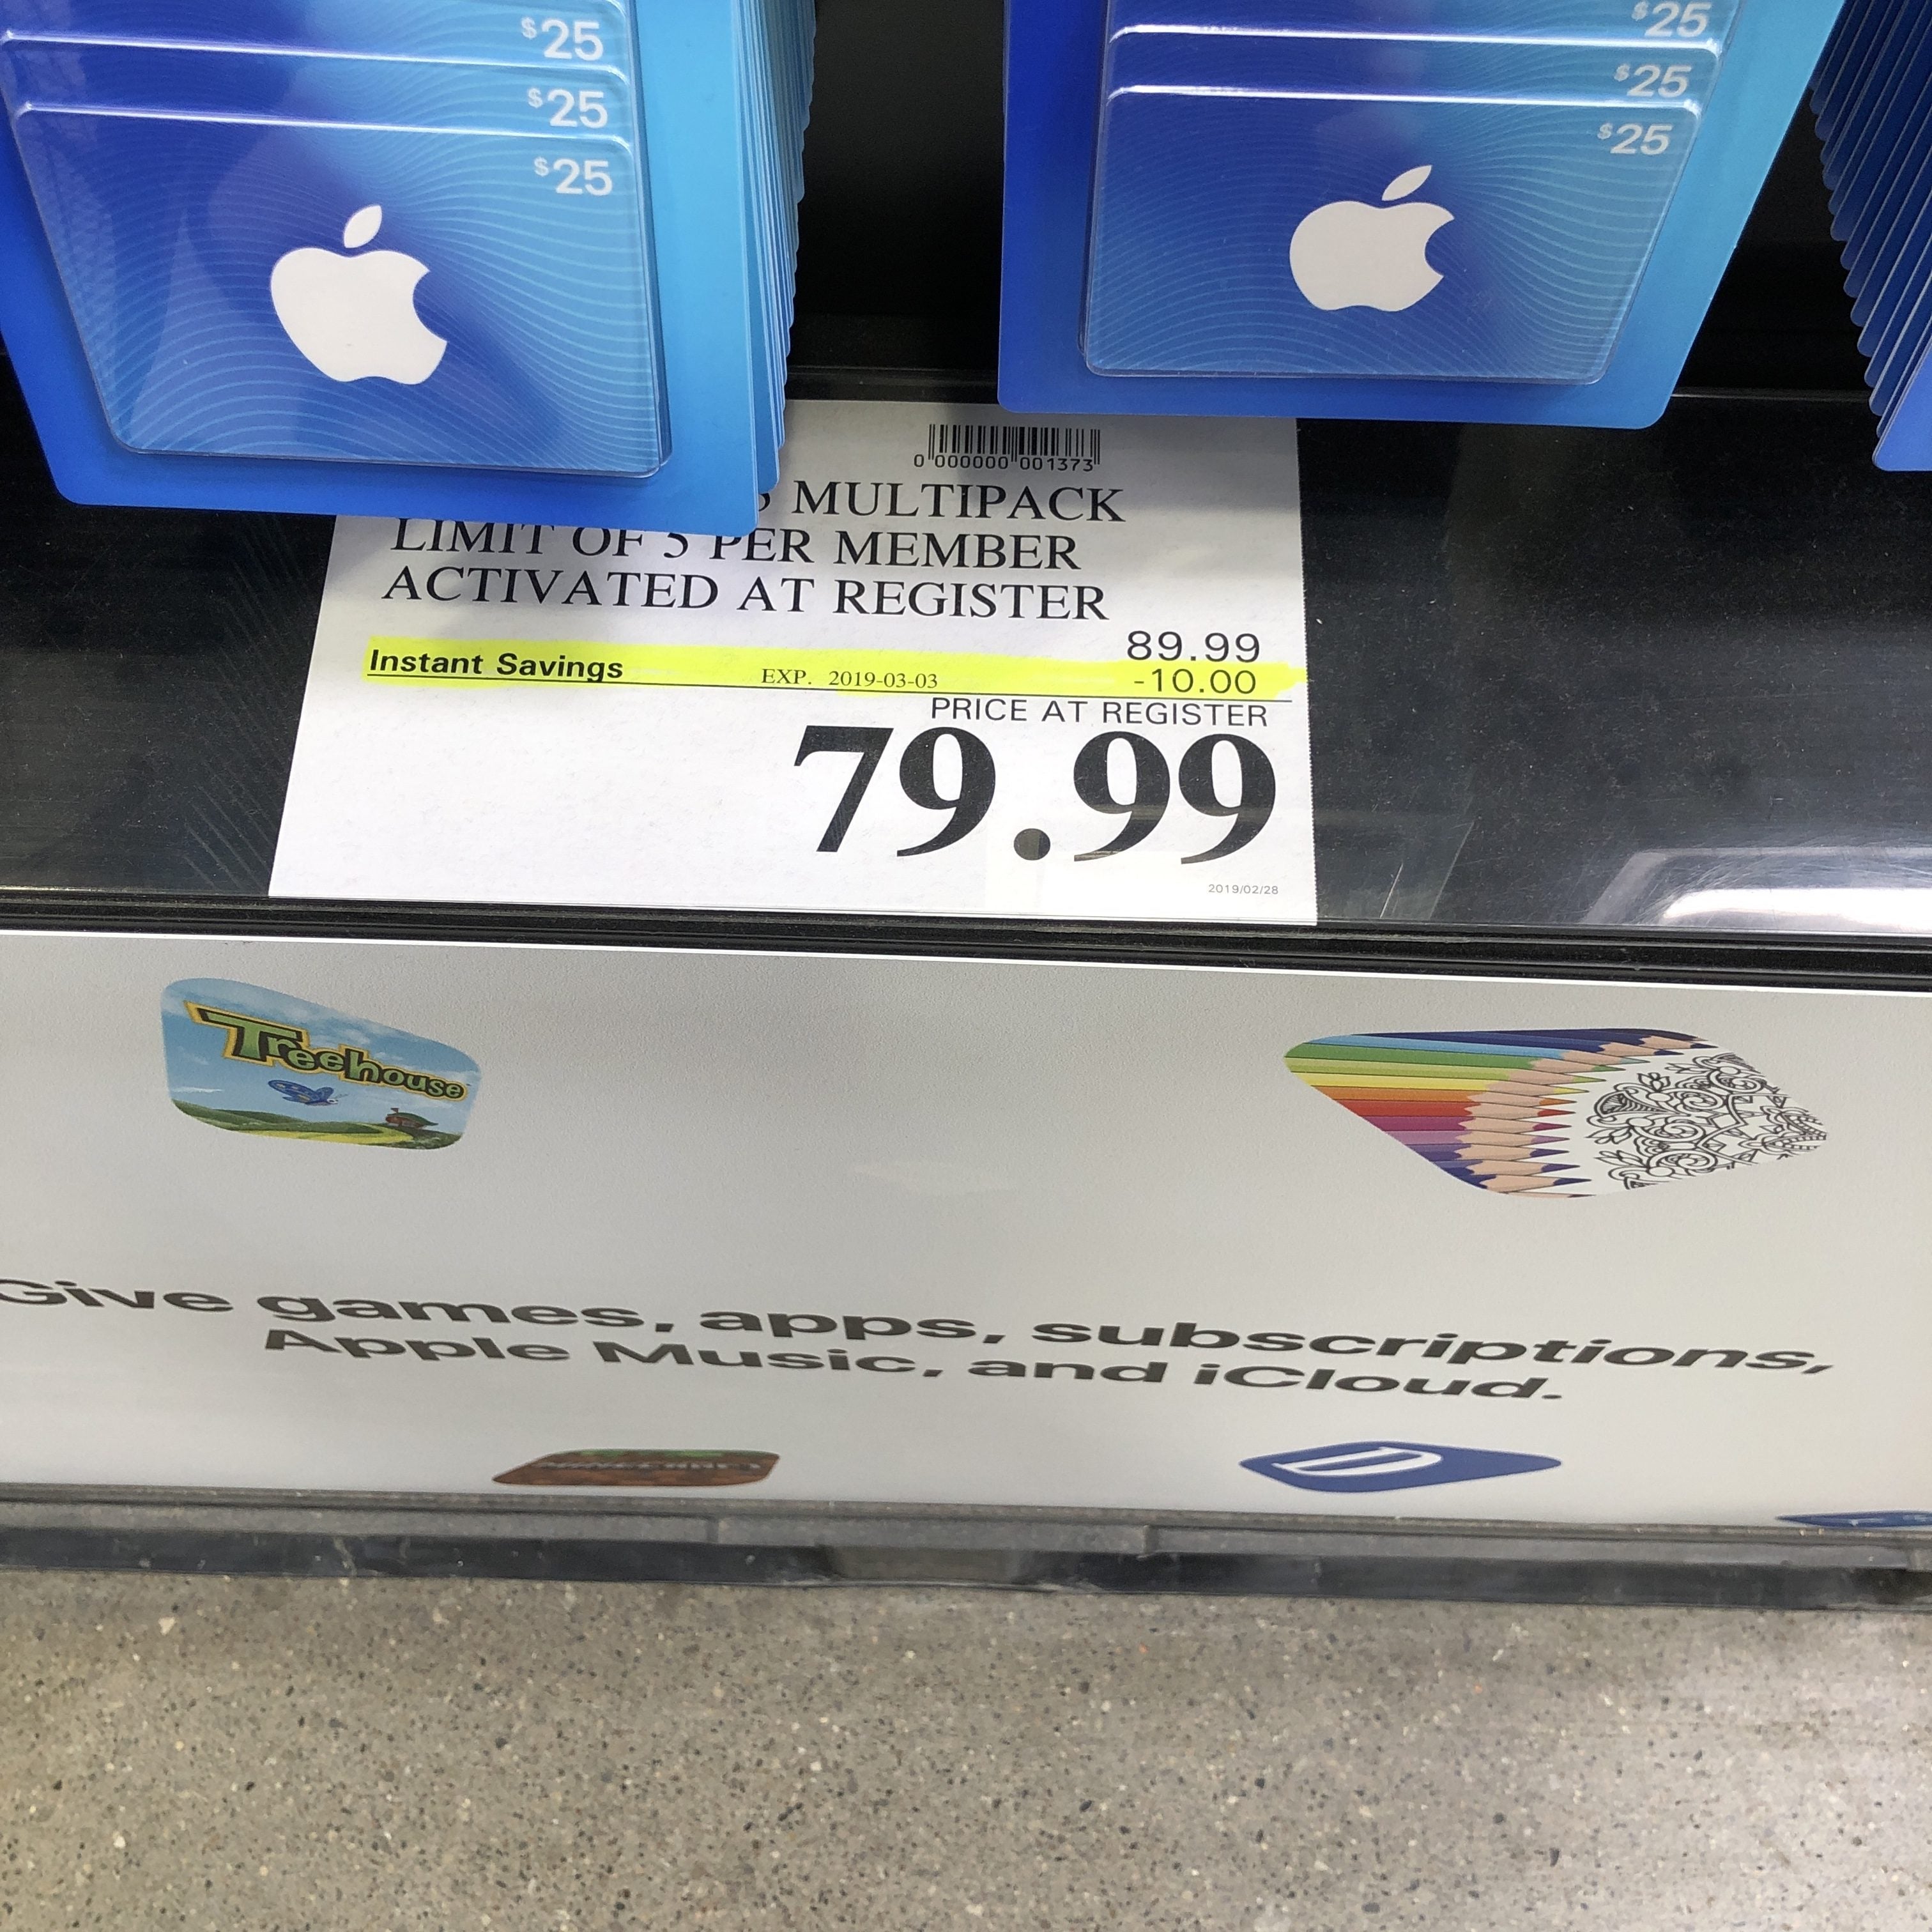 Costco $100 iTunes Cards for $79.99 instore. $83.99 online - Page 2 - RedFlagDeals.com Forums